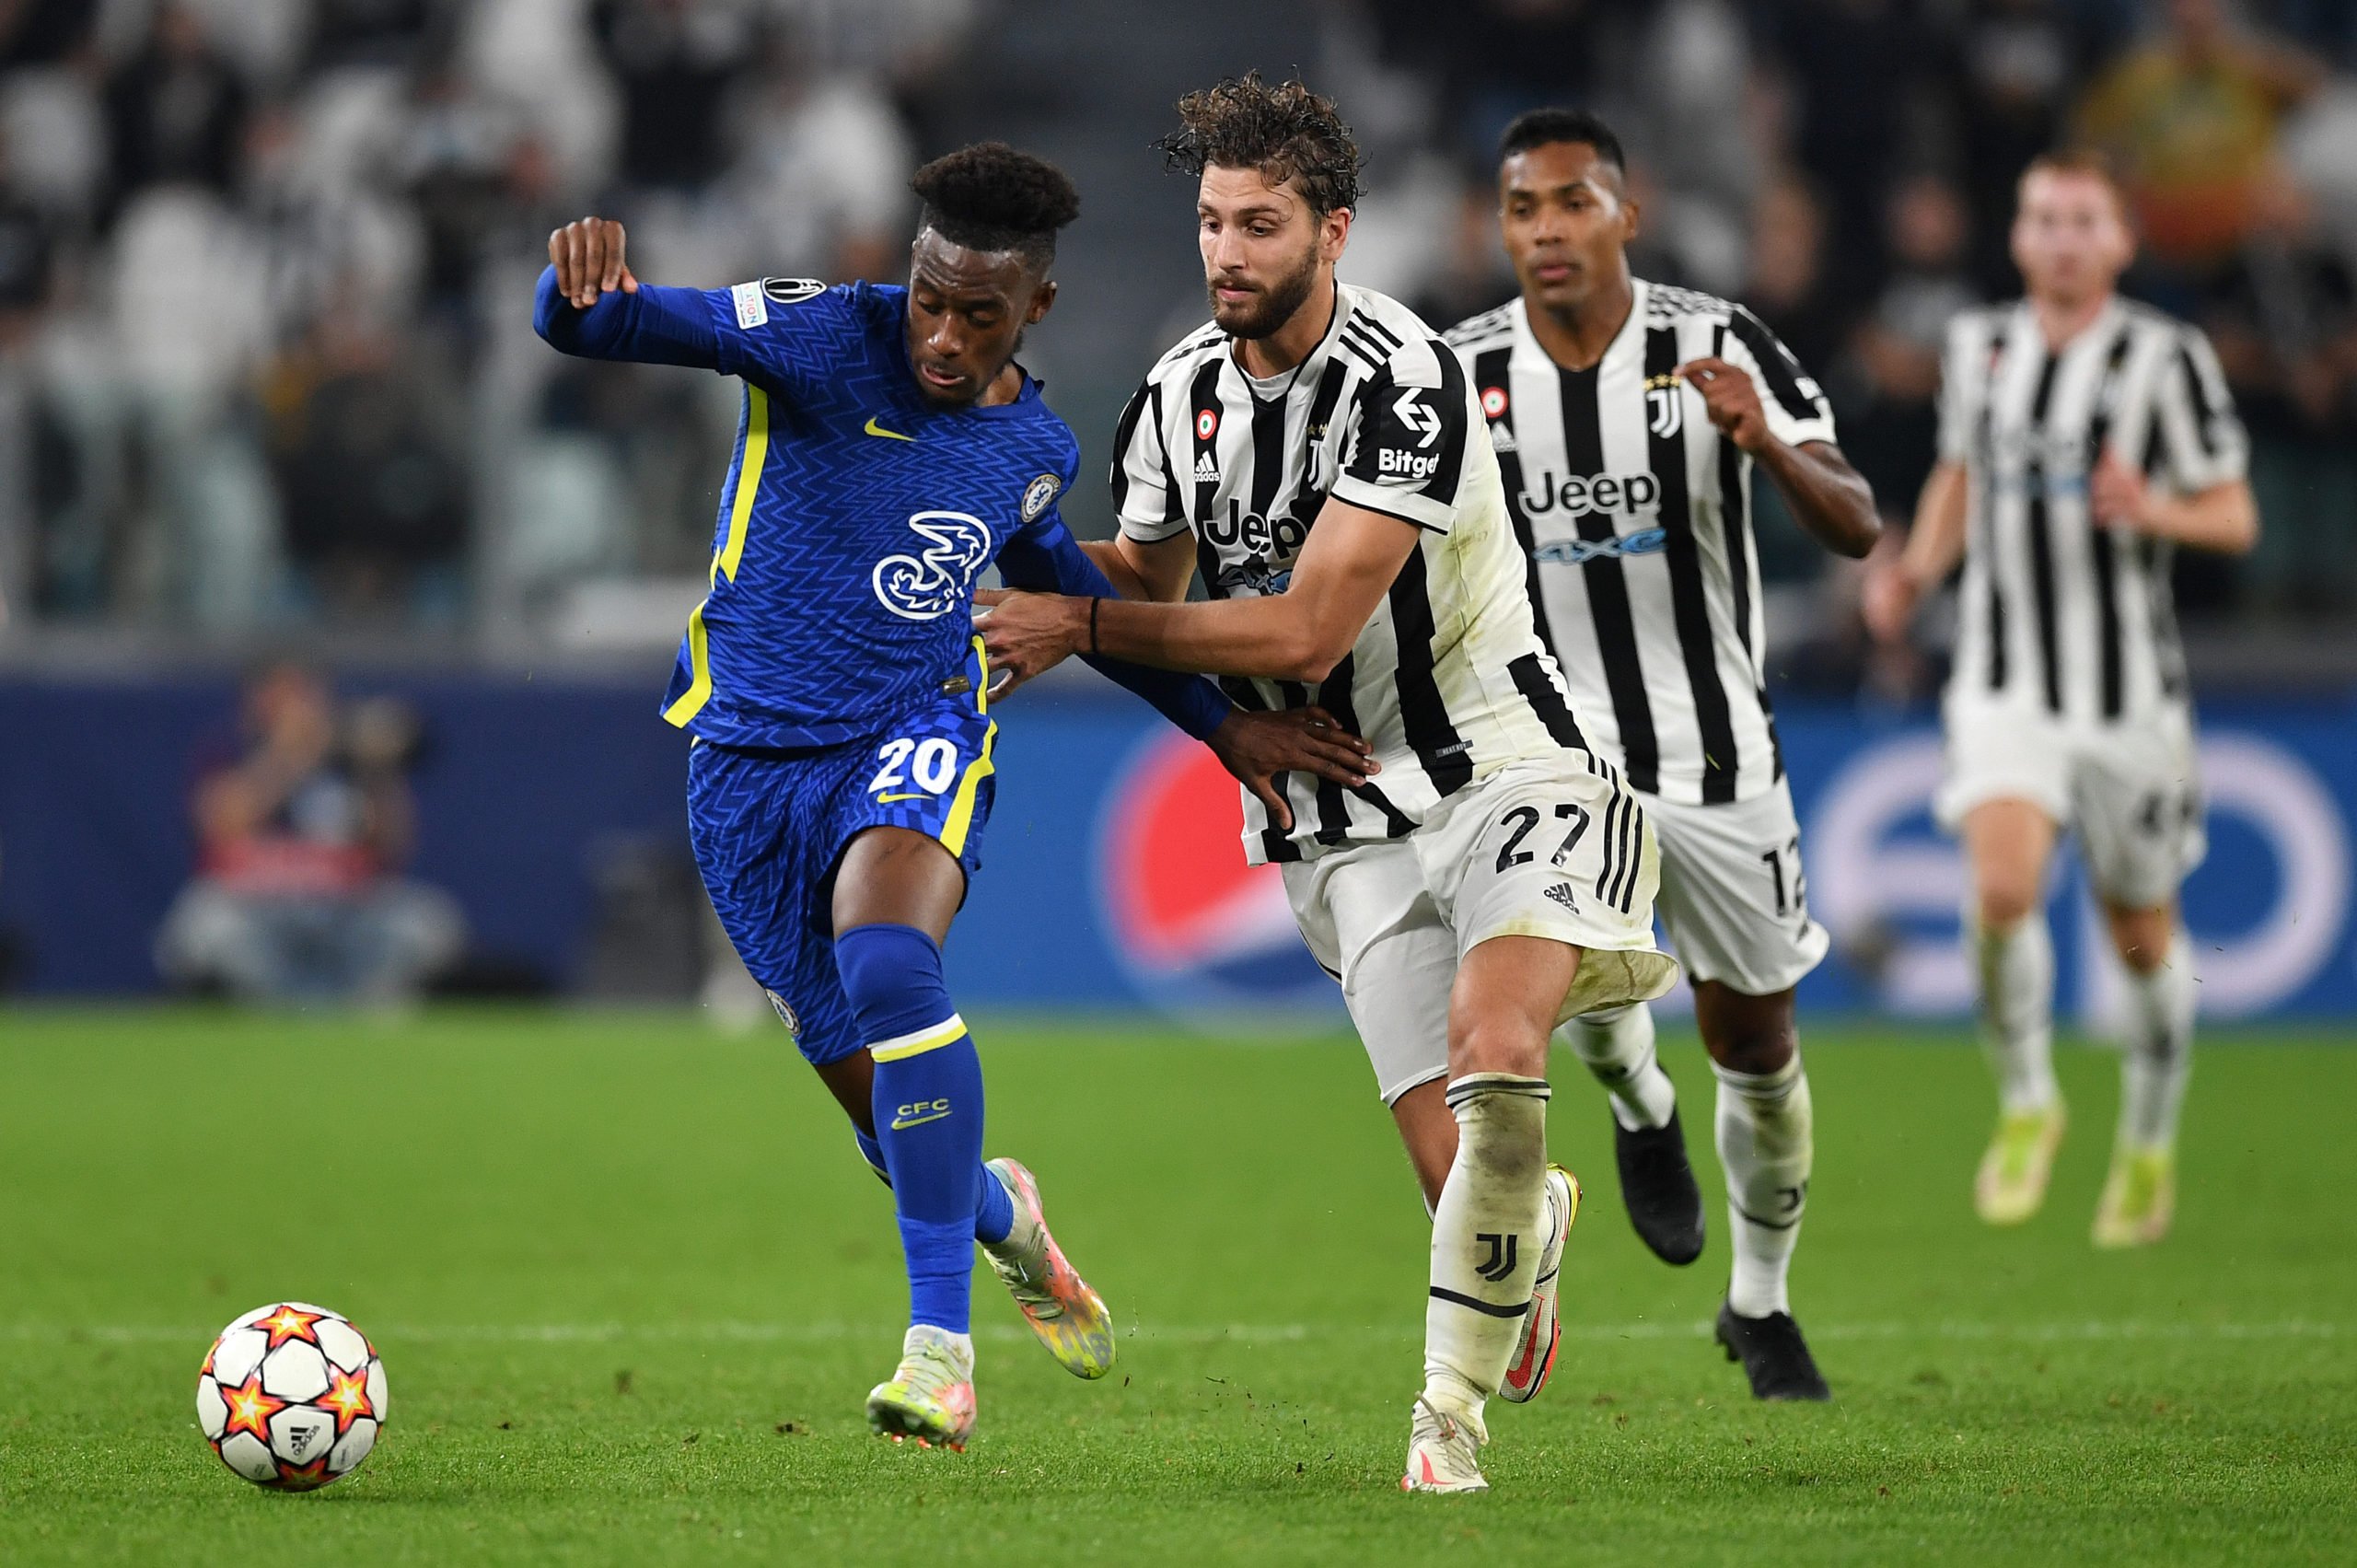 TURIN, ITALY - SEPTEMBER 29: Callum Hudson-Odoi of Chelsea battles for possession with Manuel Locatelli of Juventus during the UEFA Champions League group H match between Juventus and Chelsea FC at the Juventus Stadium on September 29, 2021 in Turin, Italy. (Photo by Valerio Pennicino/Getty Images)The 4th Official uses images provided by the following image agency: Getty Images (https://www.gettyimages.de/) Imago Images (https://www.imago-images.de/) (Photo by Clive Rose/Getty Images)